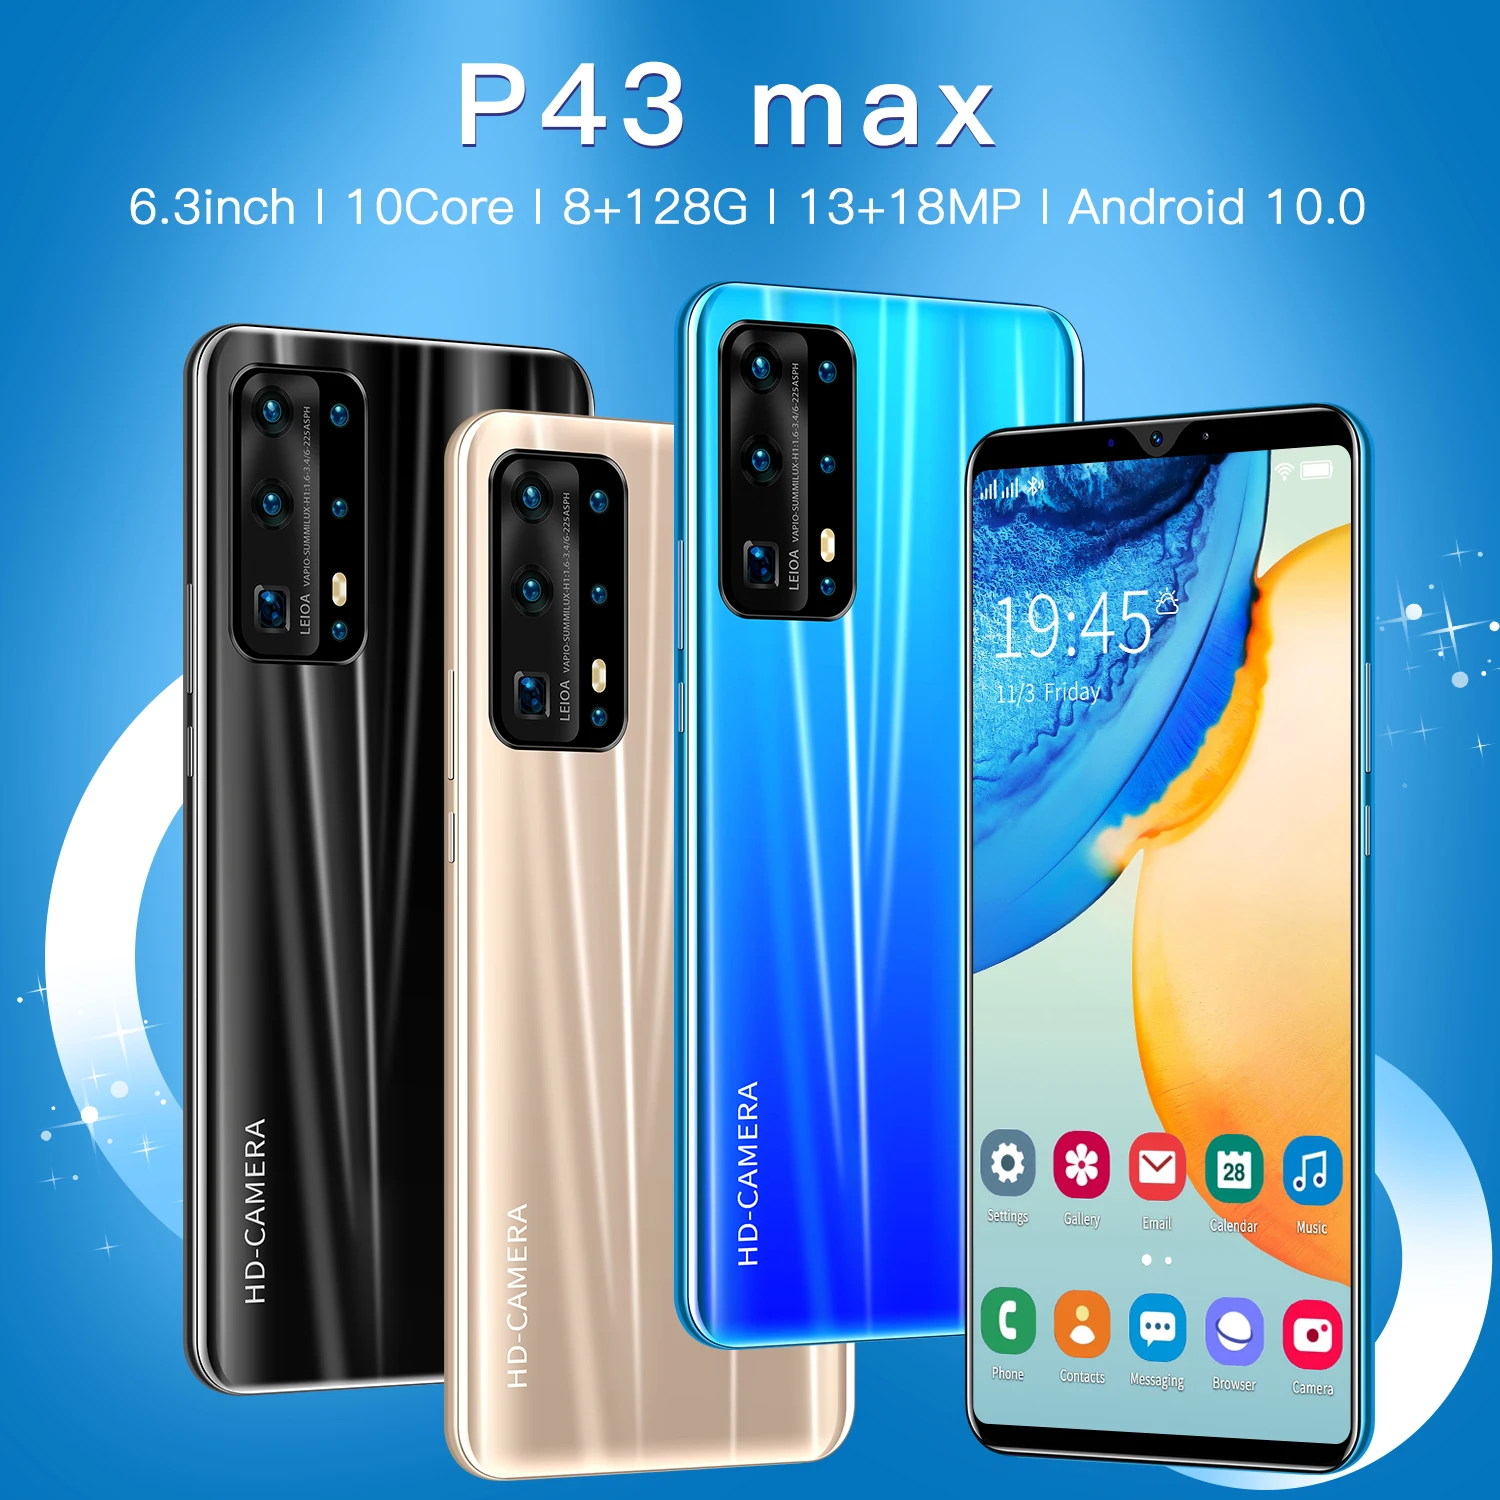 cheapest smartphone p43 max 6 3 inch hd 8gb ram 128gb rom global version smart phone android valid google play store gps phone free global shipping